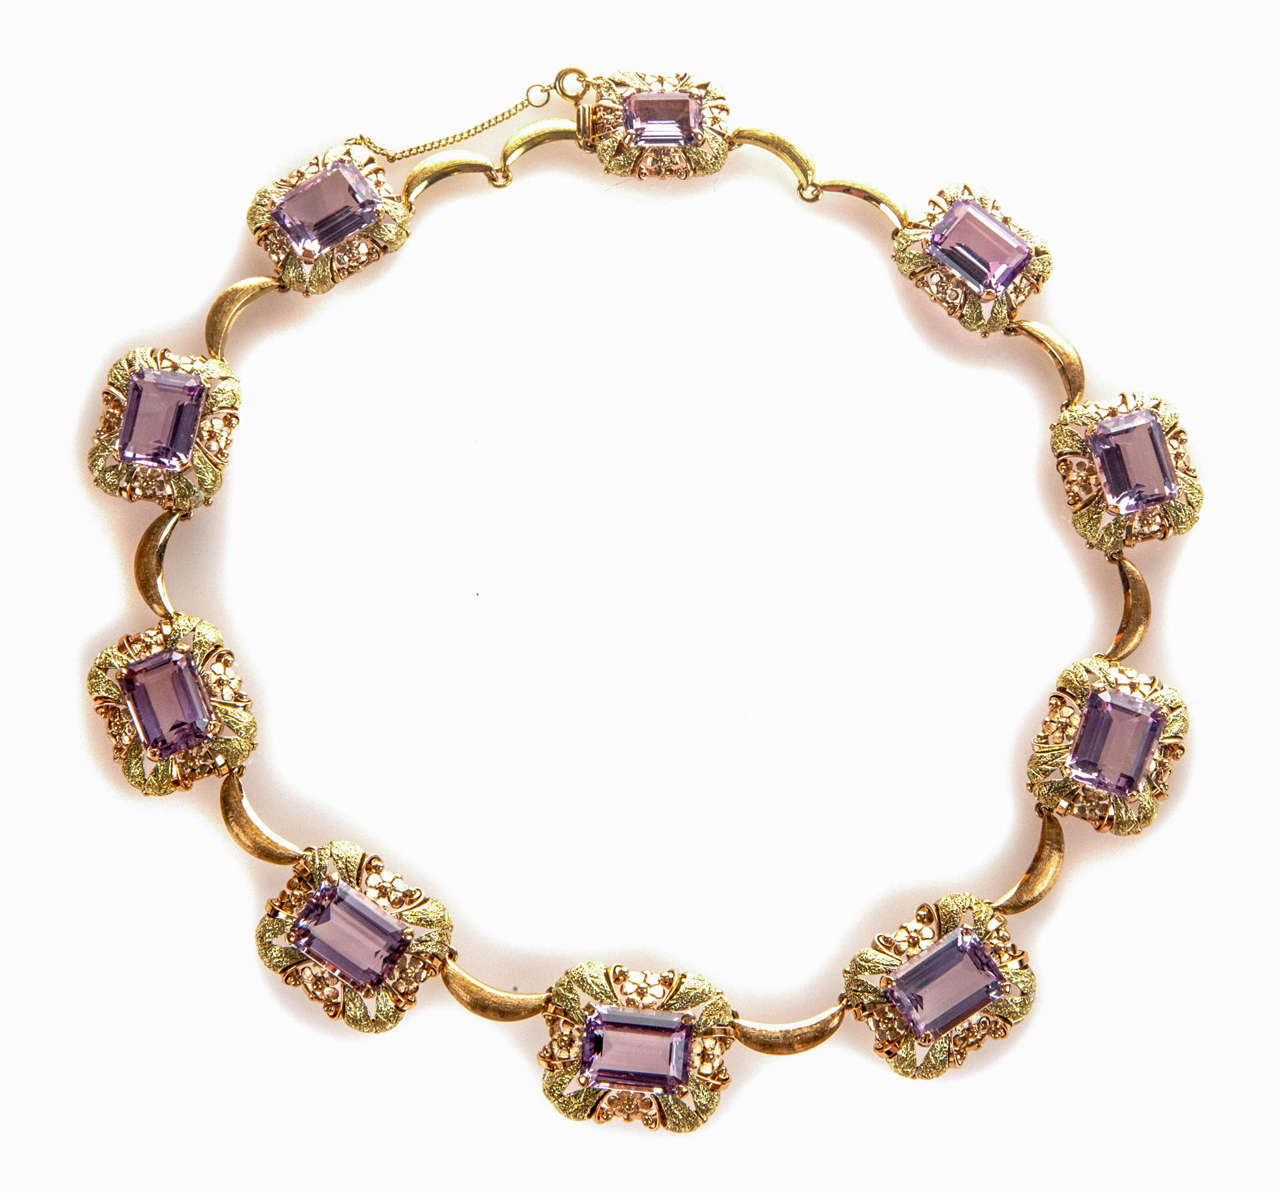 Retro Art Deco Amethyst Pink Green Gold Necklace For Sale at 1stdibs